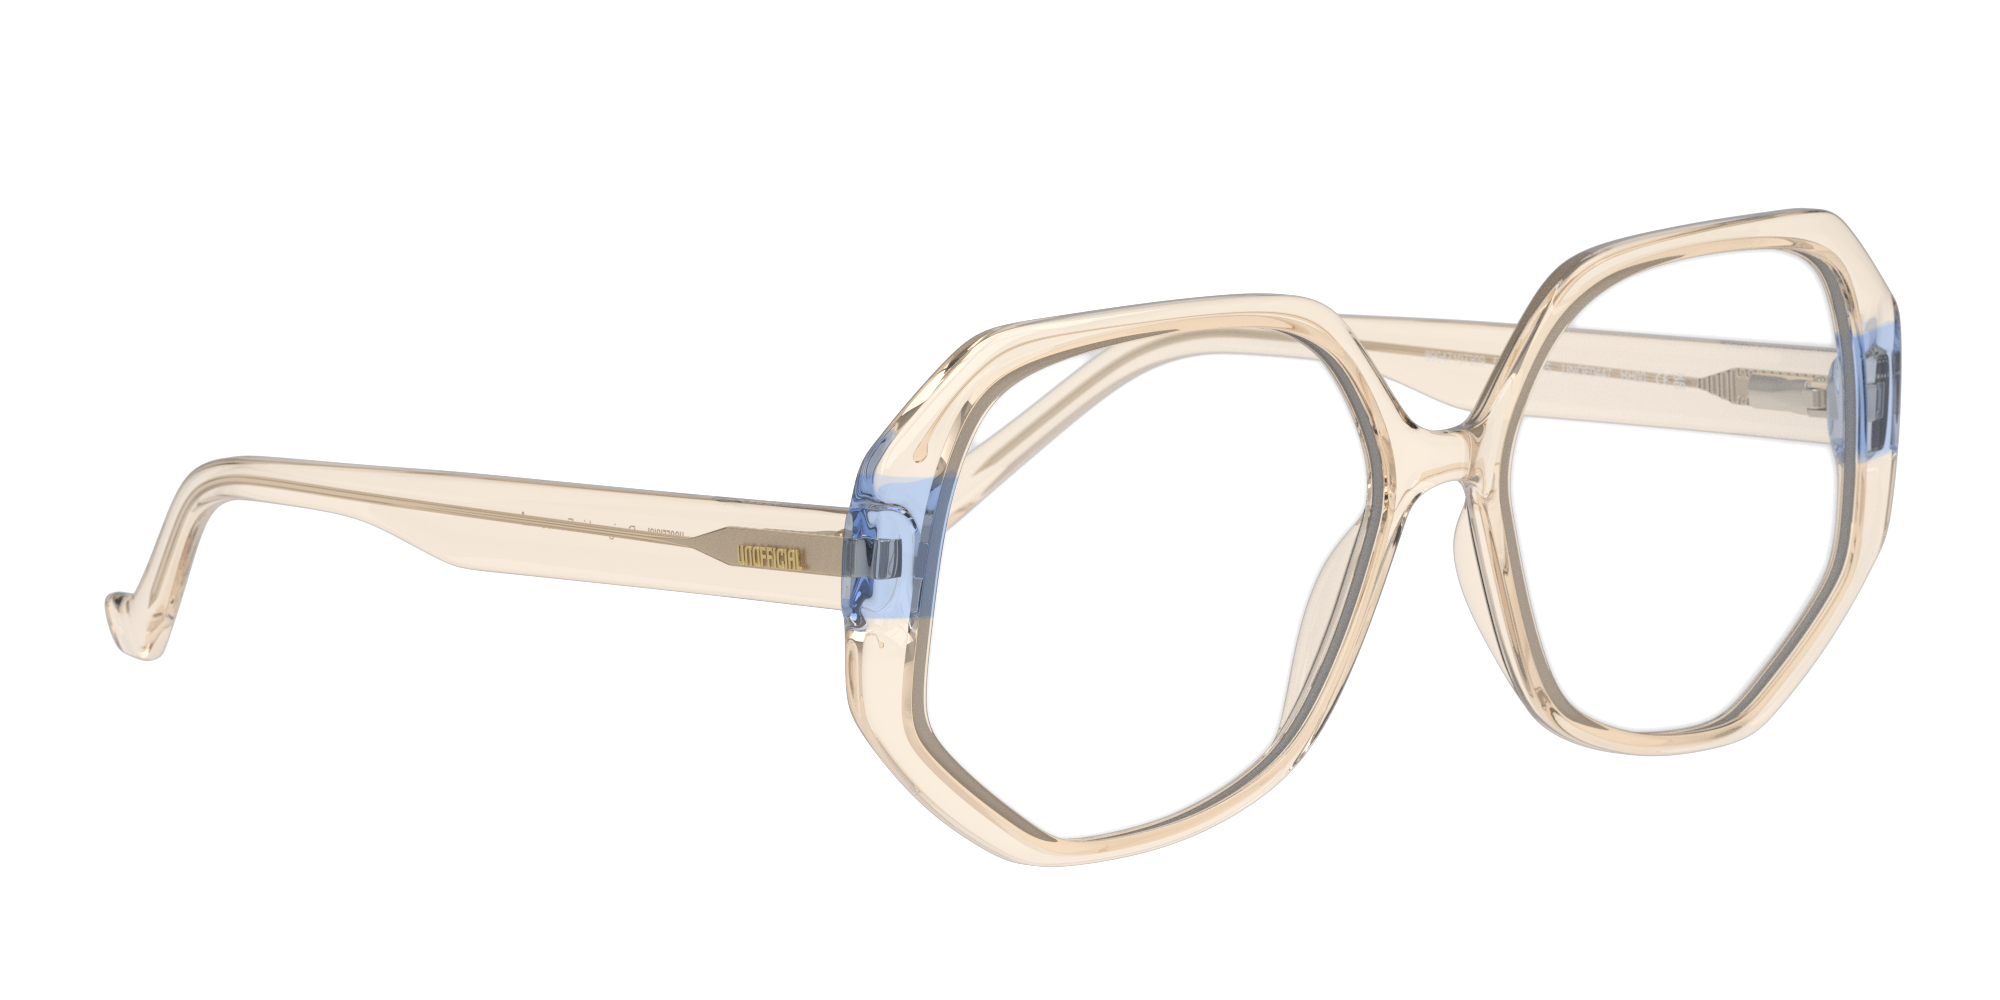 Angle_Right01 Unofficial UNOF0447 FF00 Beige, Blauw